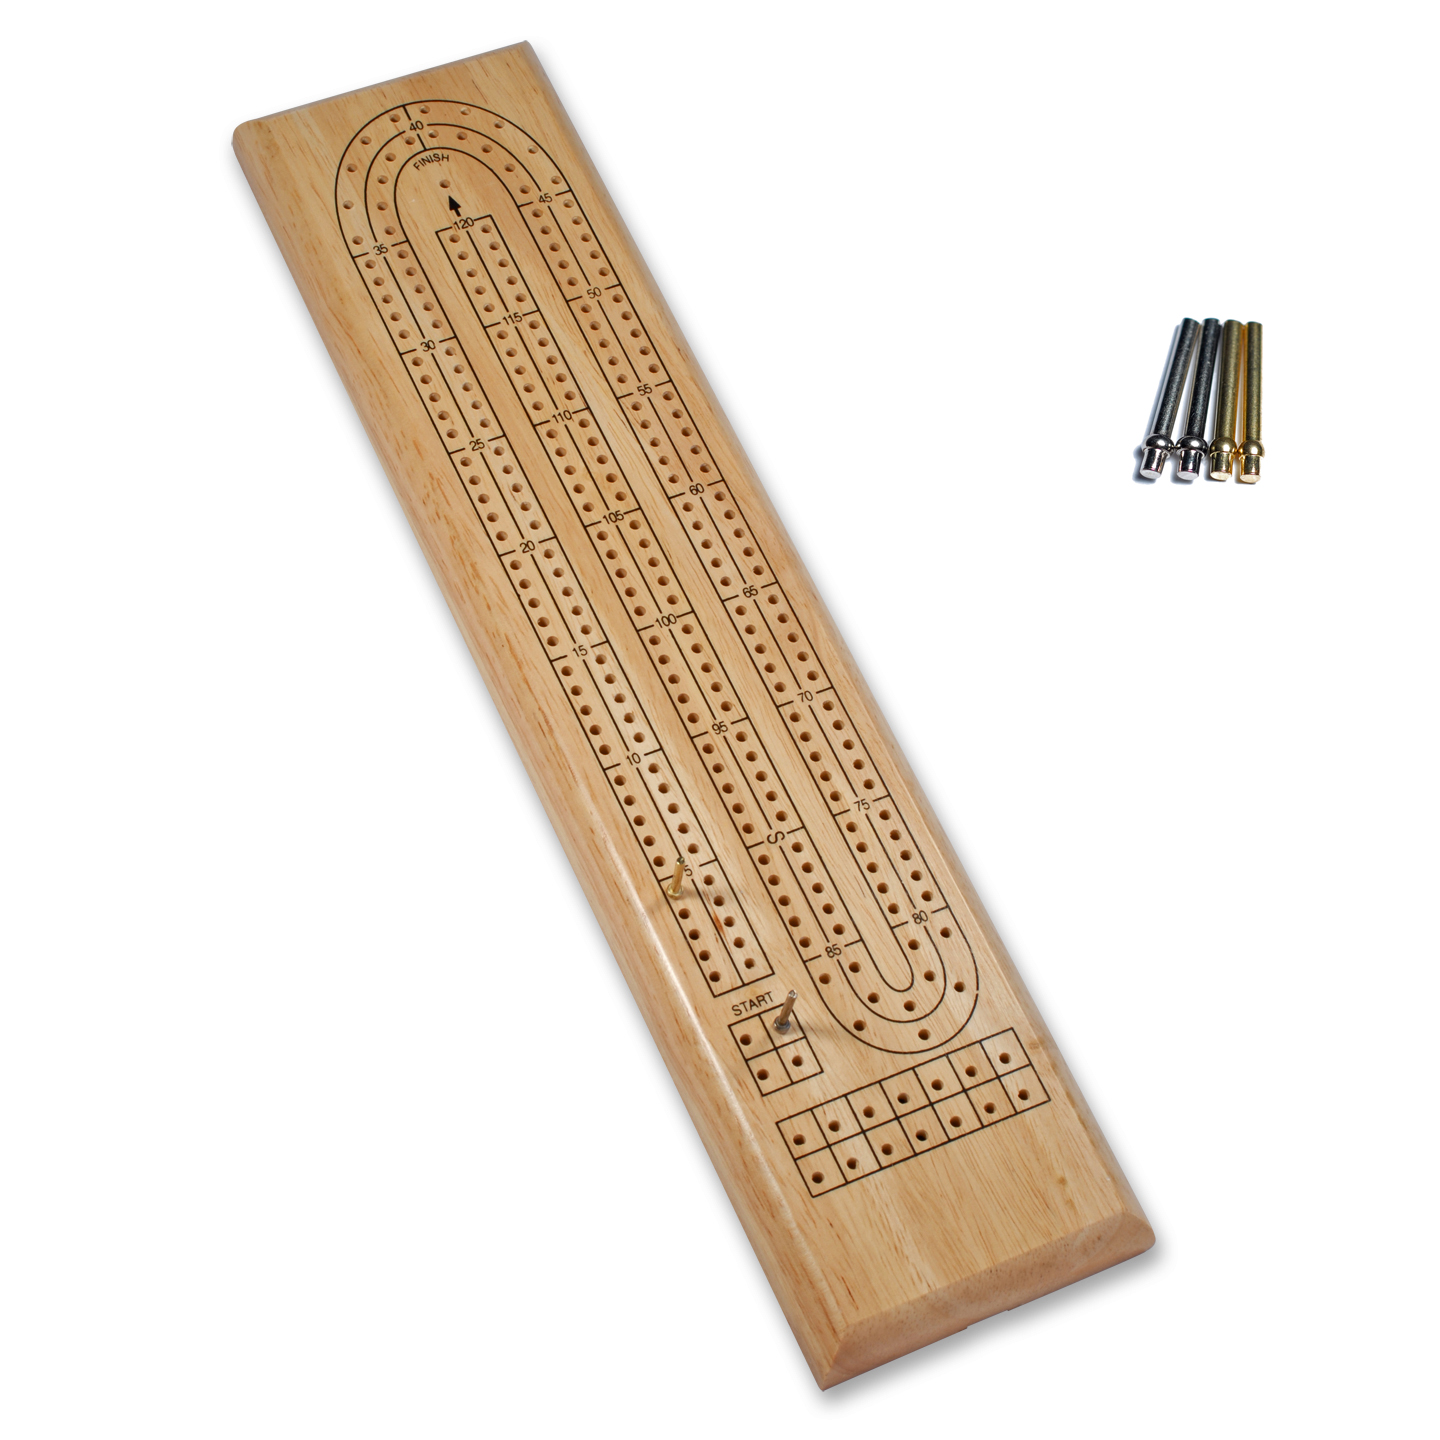 LOT of 4 New wood eagle cribbage board 3 tracks with pegs 